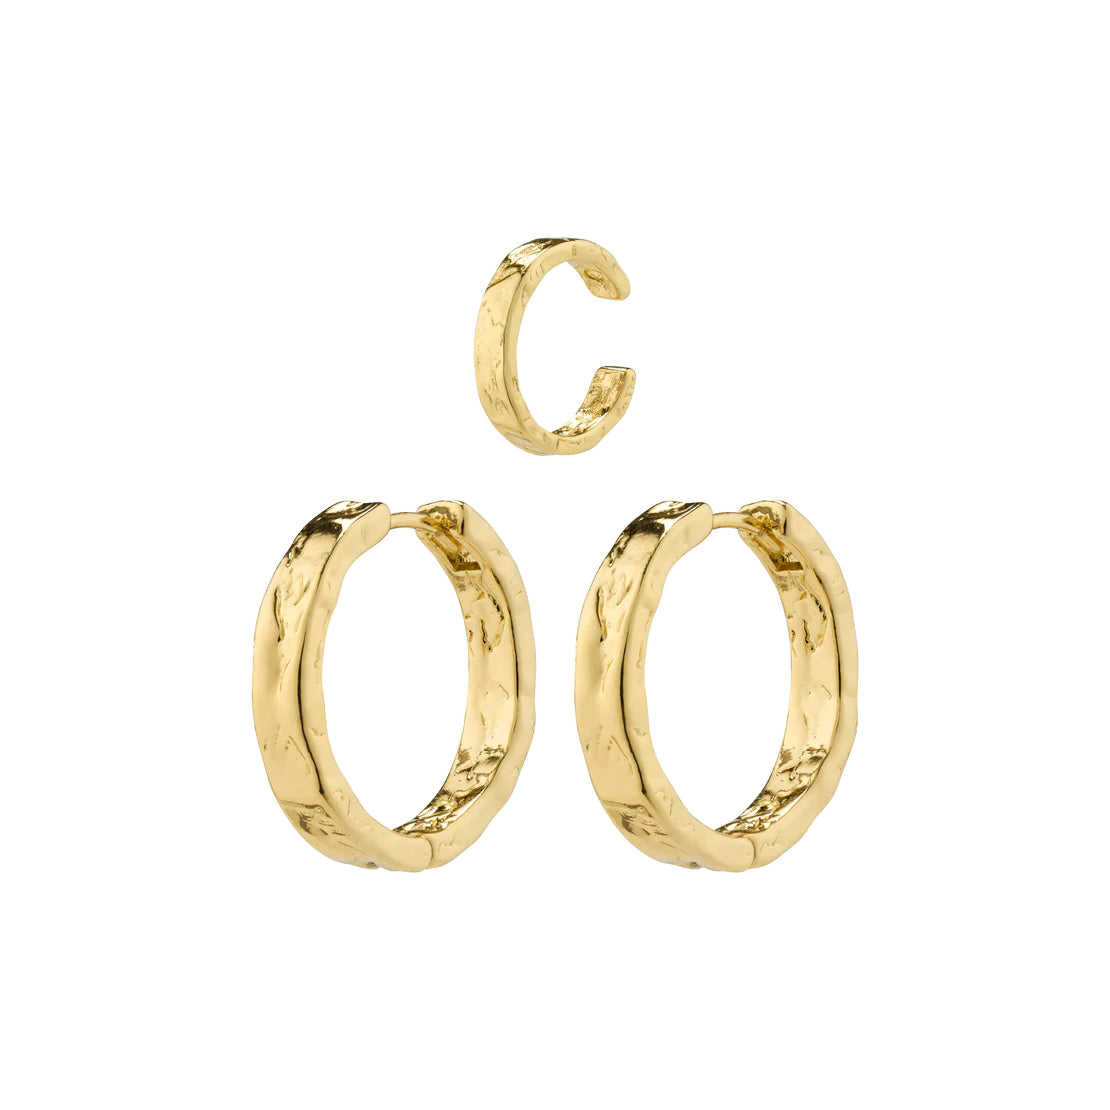 KINDNESS RUSTIC HOOP EARRINGS & CUFF GOLD PLATED